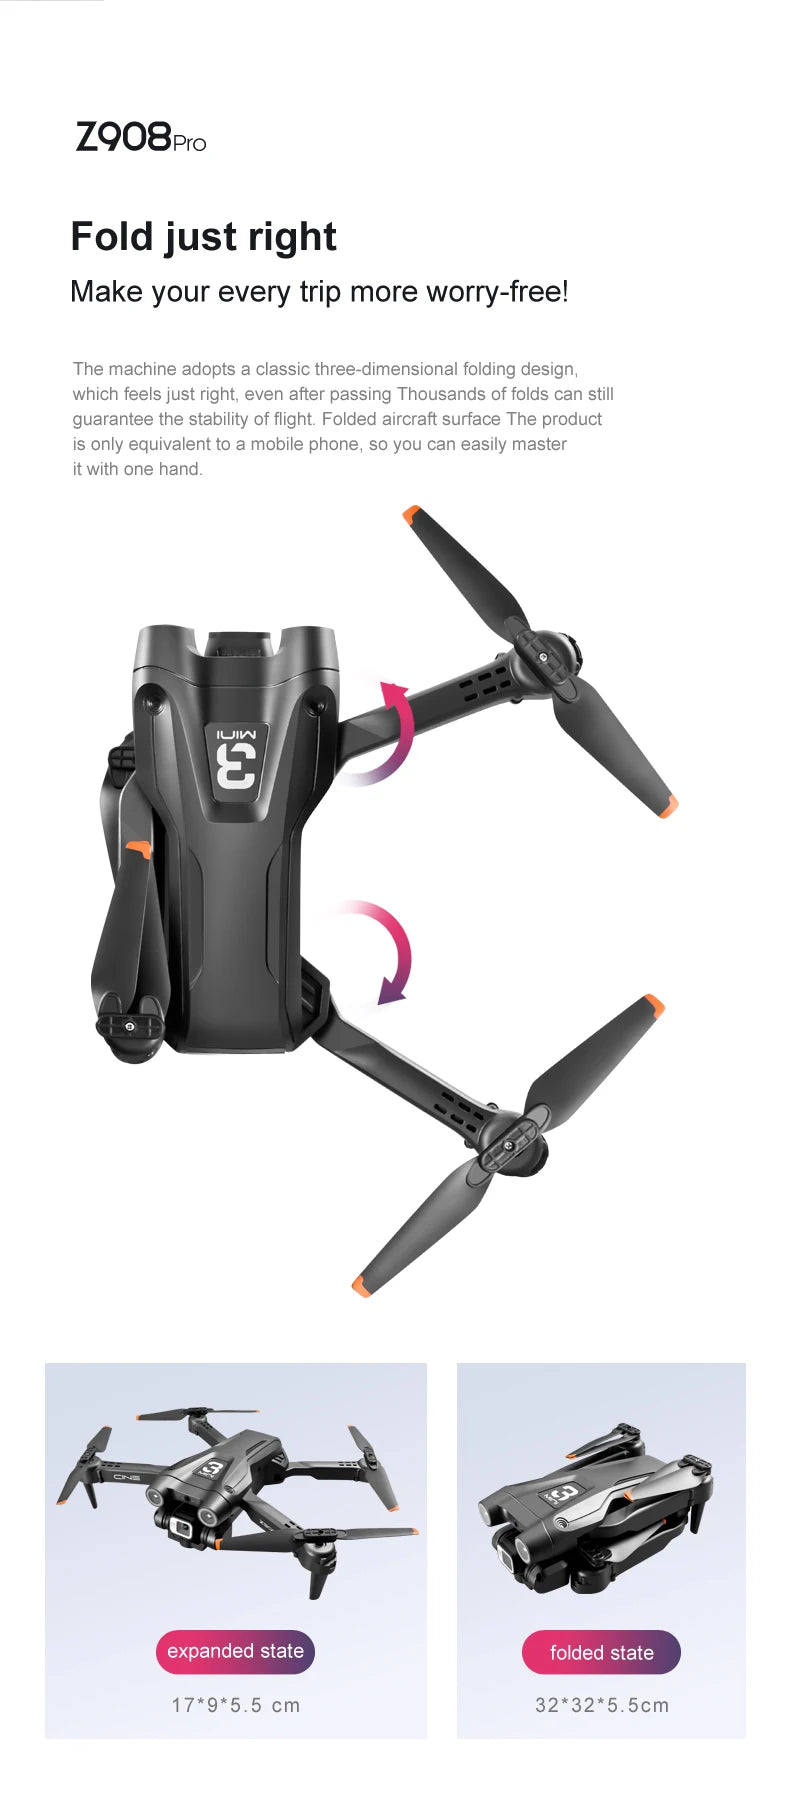 QJ New MINI4 Drone, z908pro fold just right makes your every trip more worry